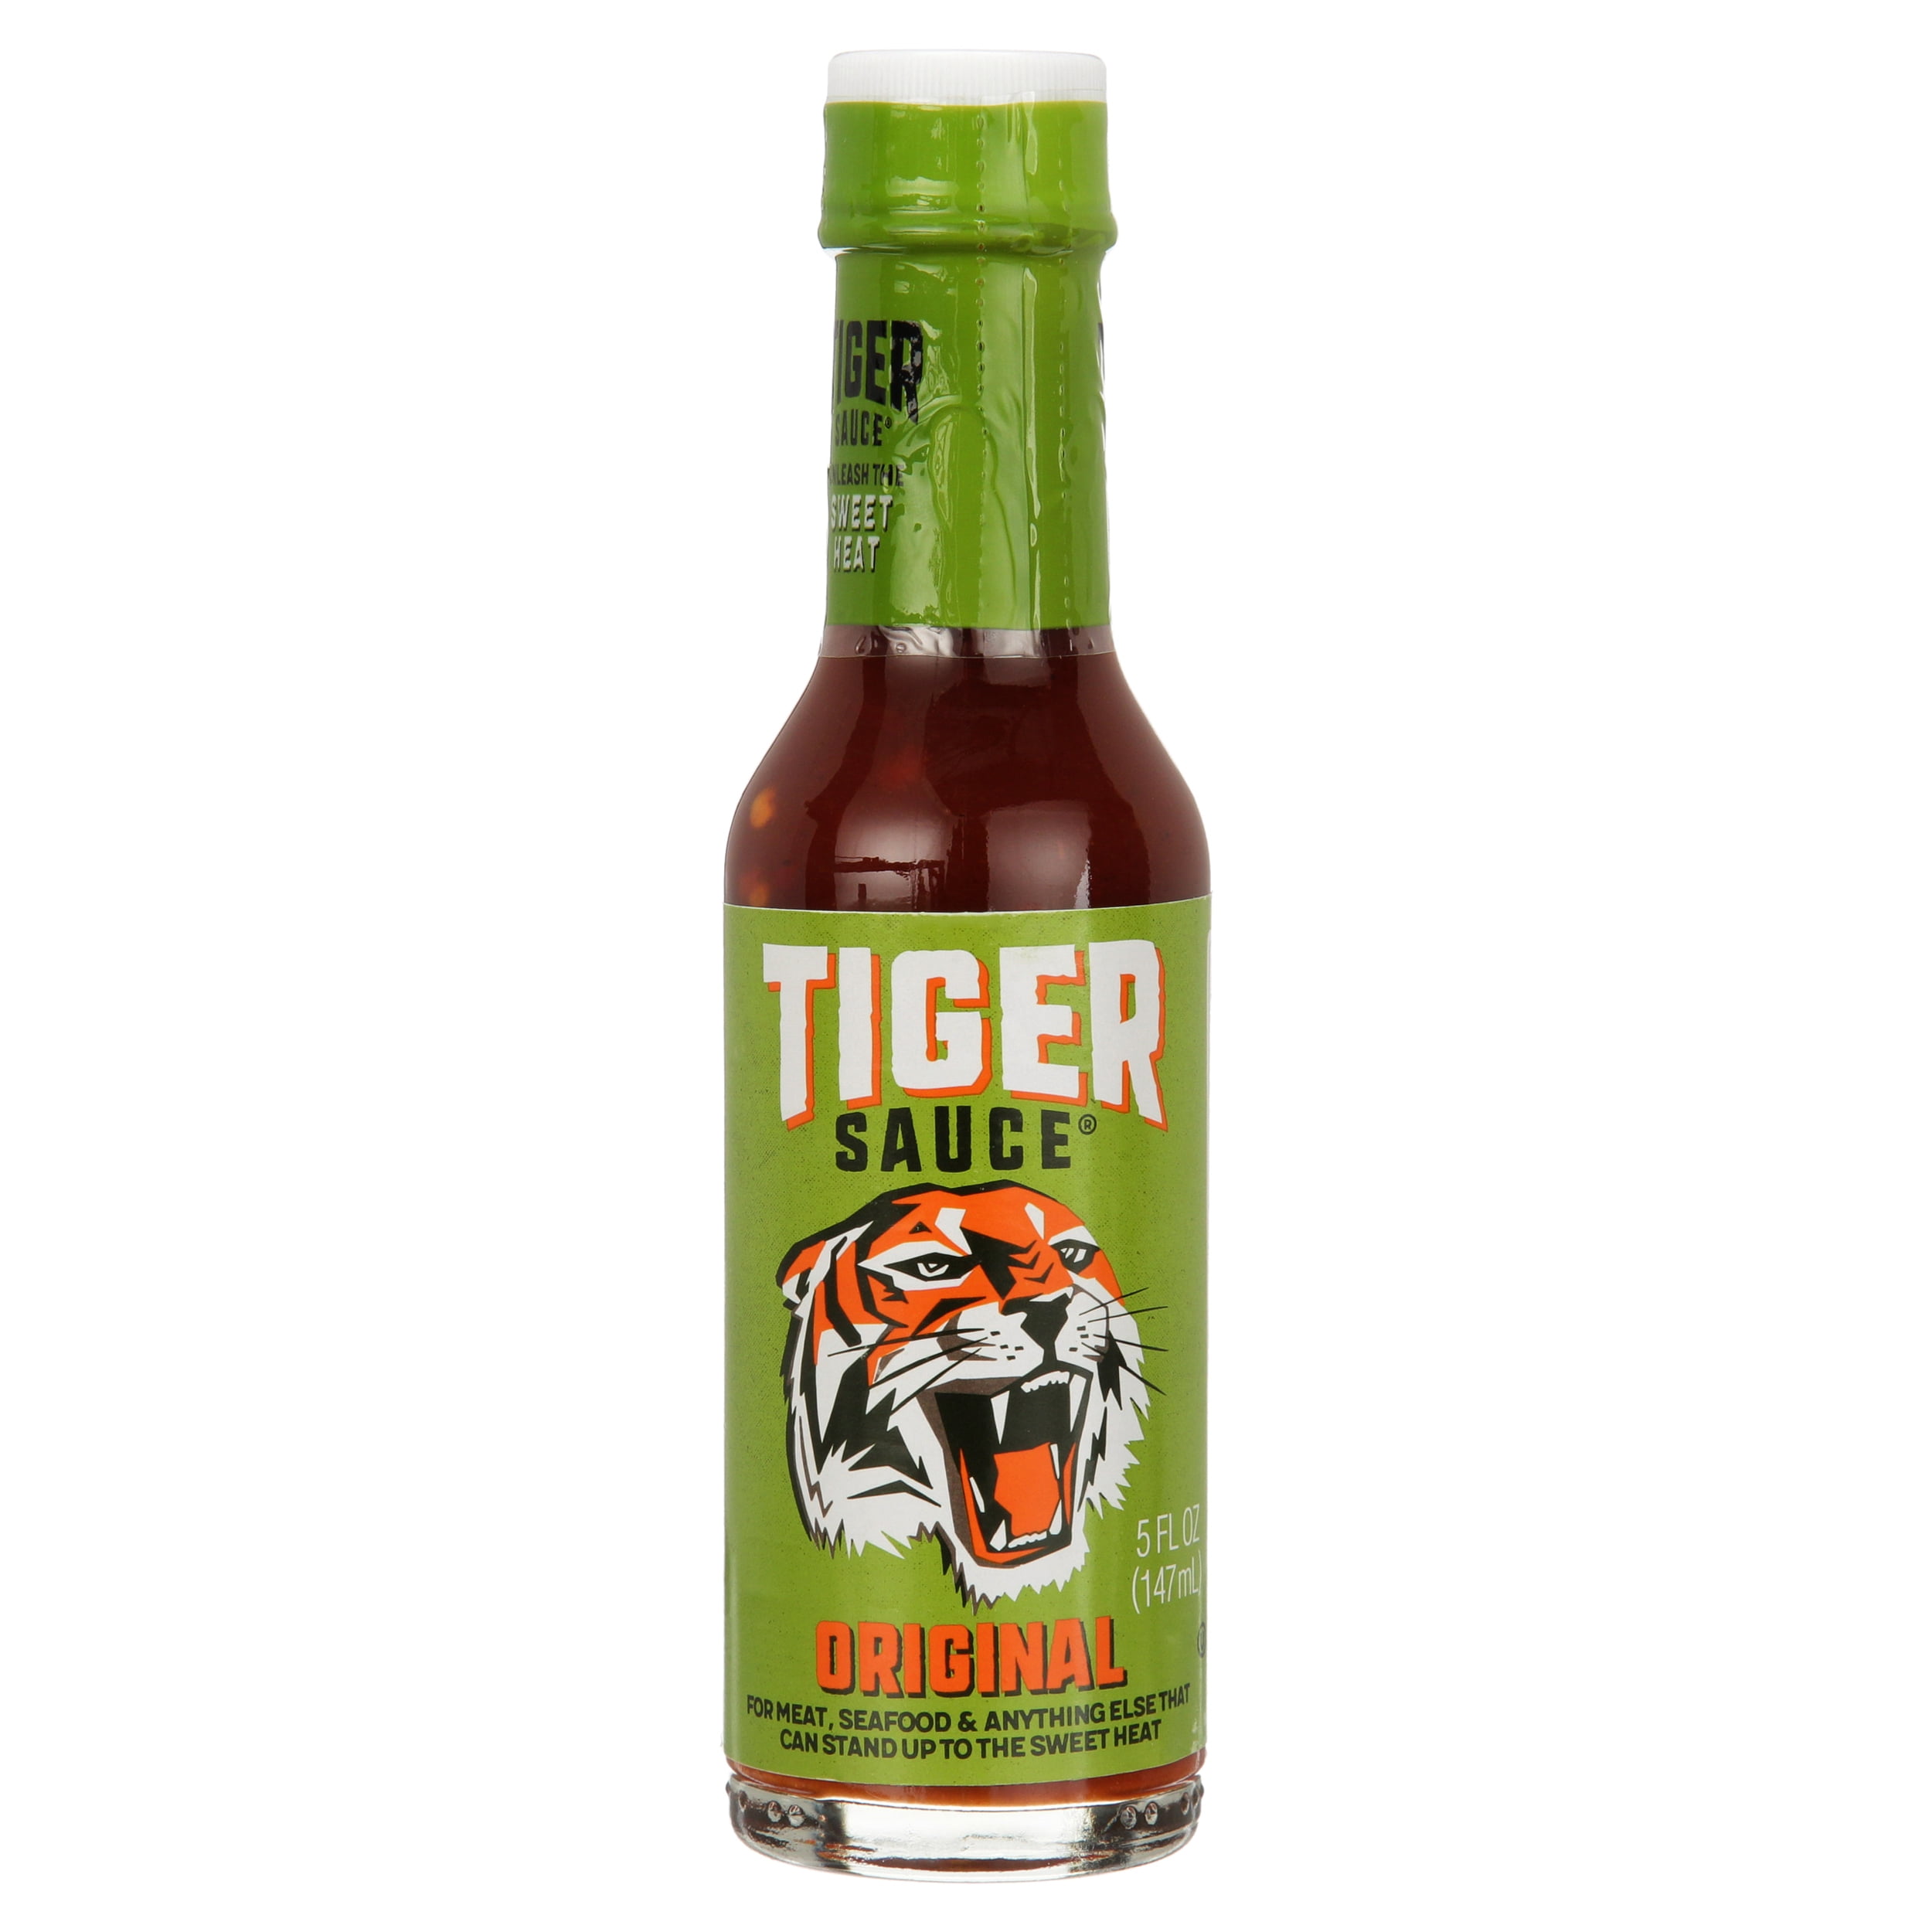  Try Me Tiger Seasoning, 5.5 Ounce (Pack of 6